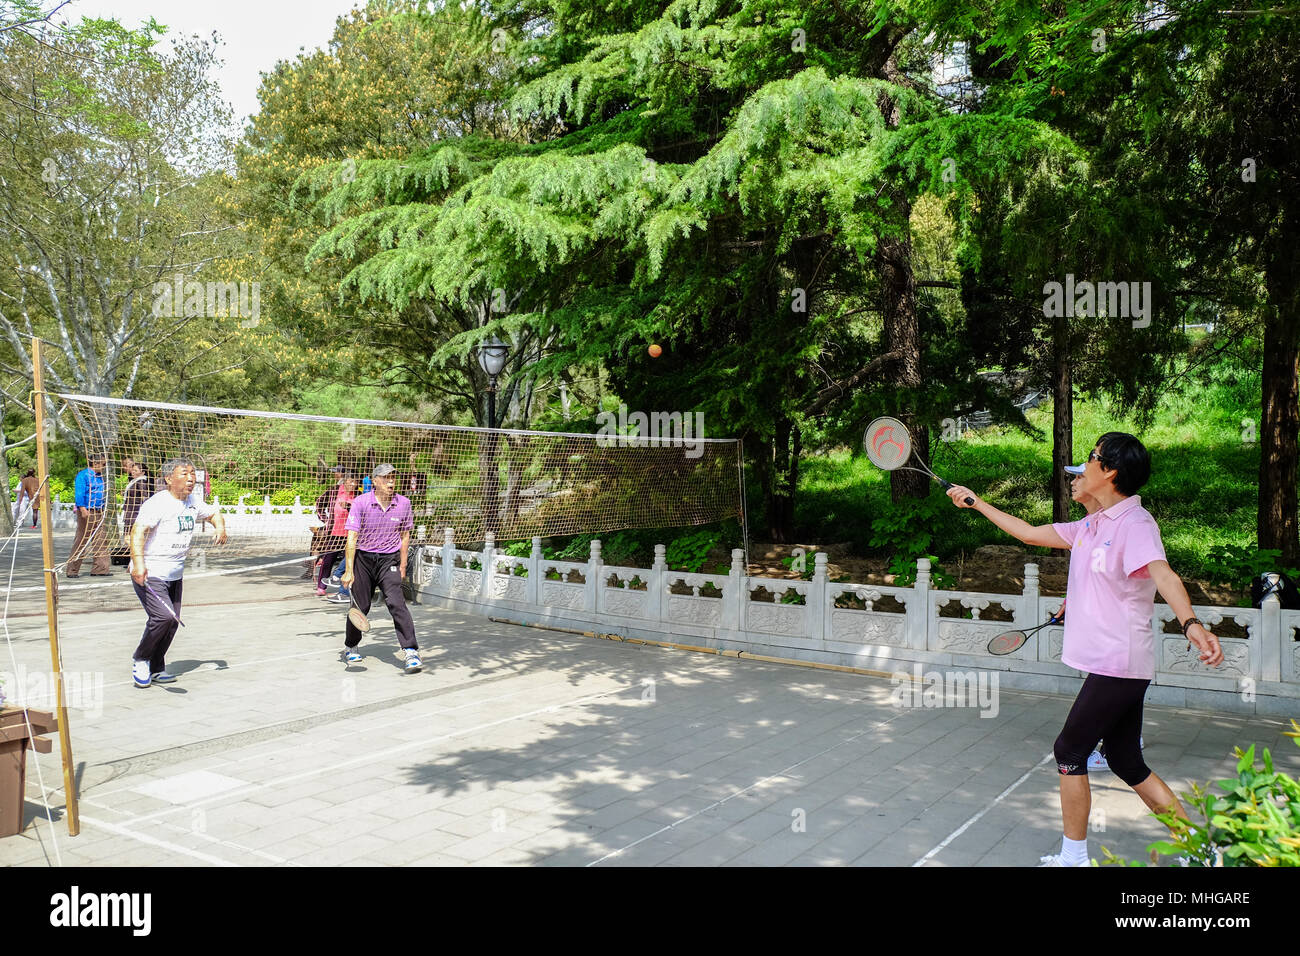 BEIJING, CHINA - APRIL 30, 2018: People are playing racket and ball in a park. Taoranting Park is a major city park located in Xicheng District in the Stock Photo